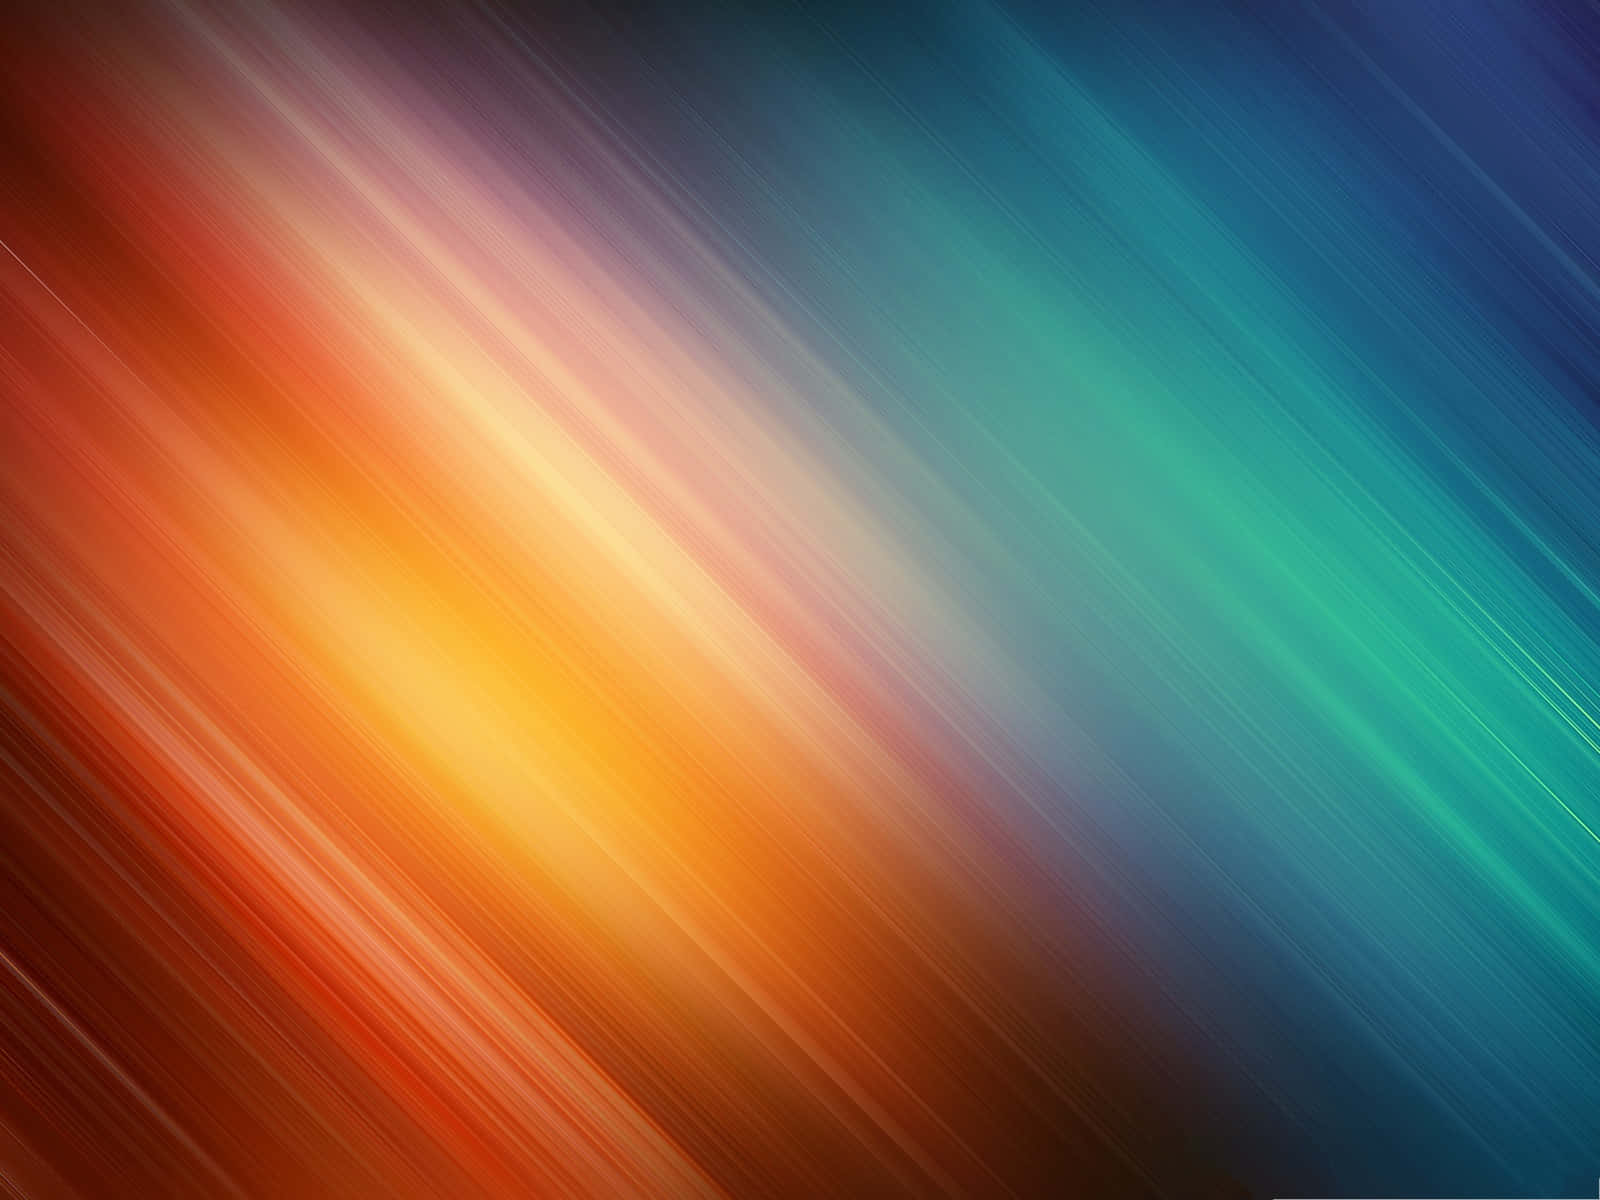 A Colorful Abstract Background With Lines